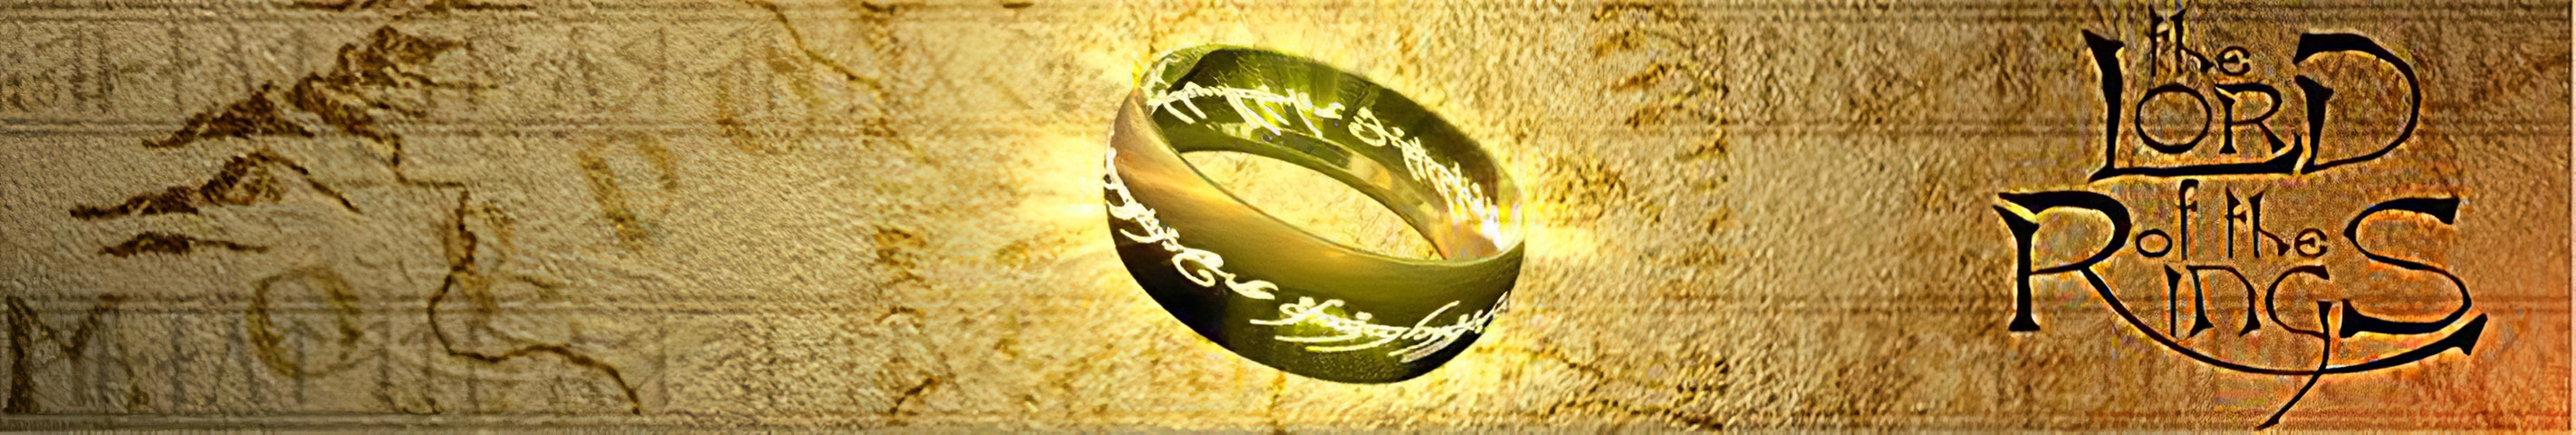 The one ring web banner